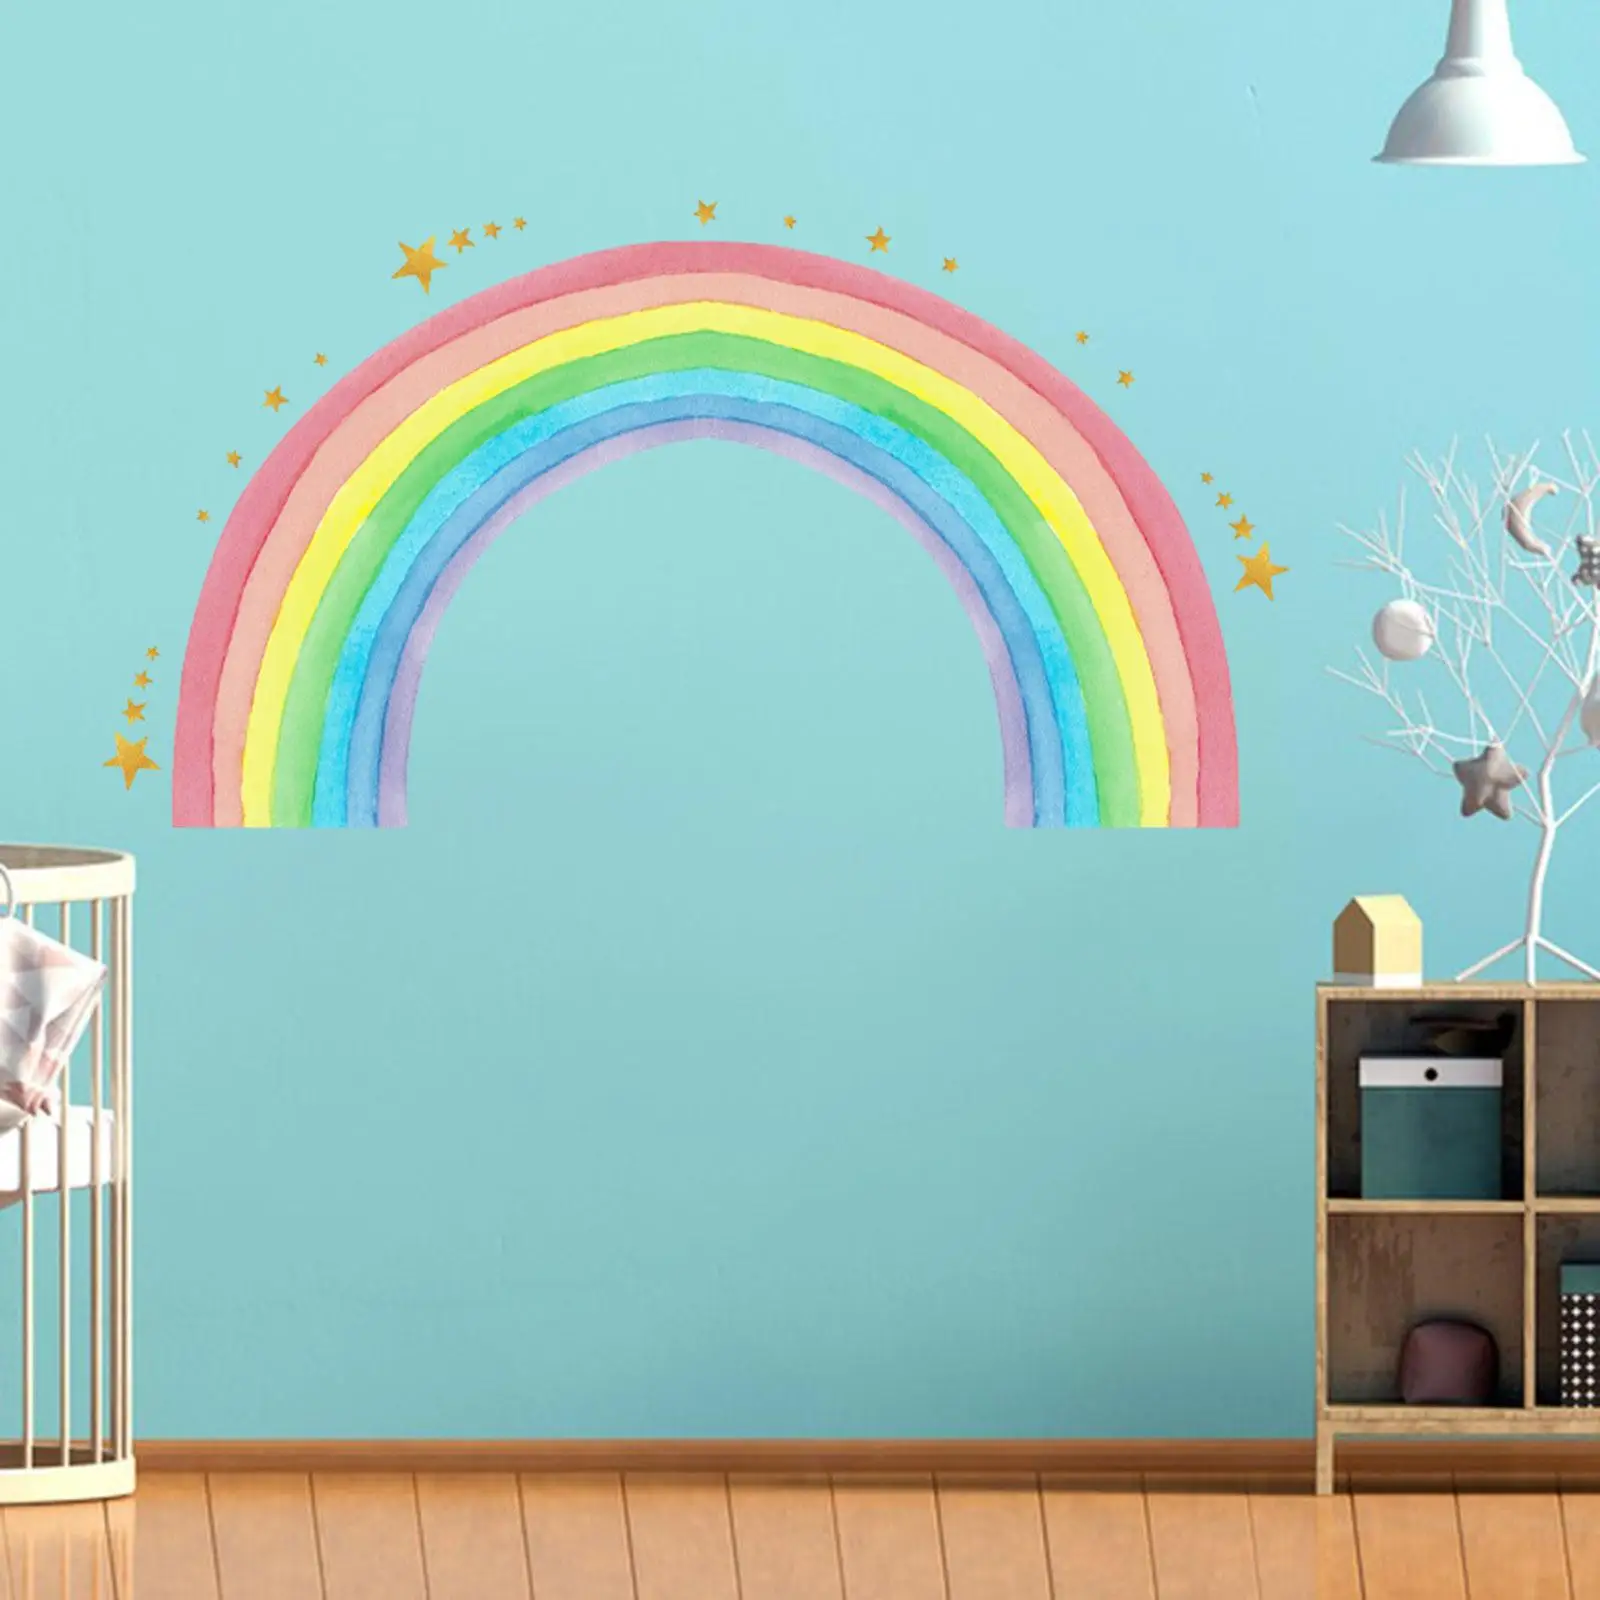 Rainbow Star Wall Sticker Mural Art Diy Colorful Large Wallpaper Art Decal for